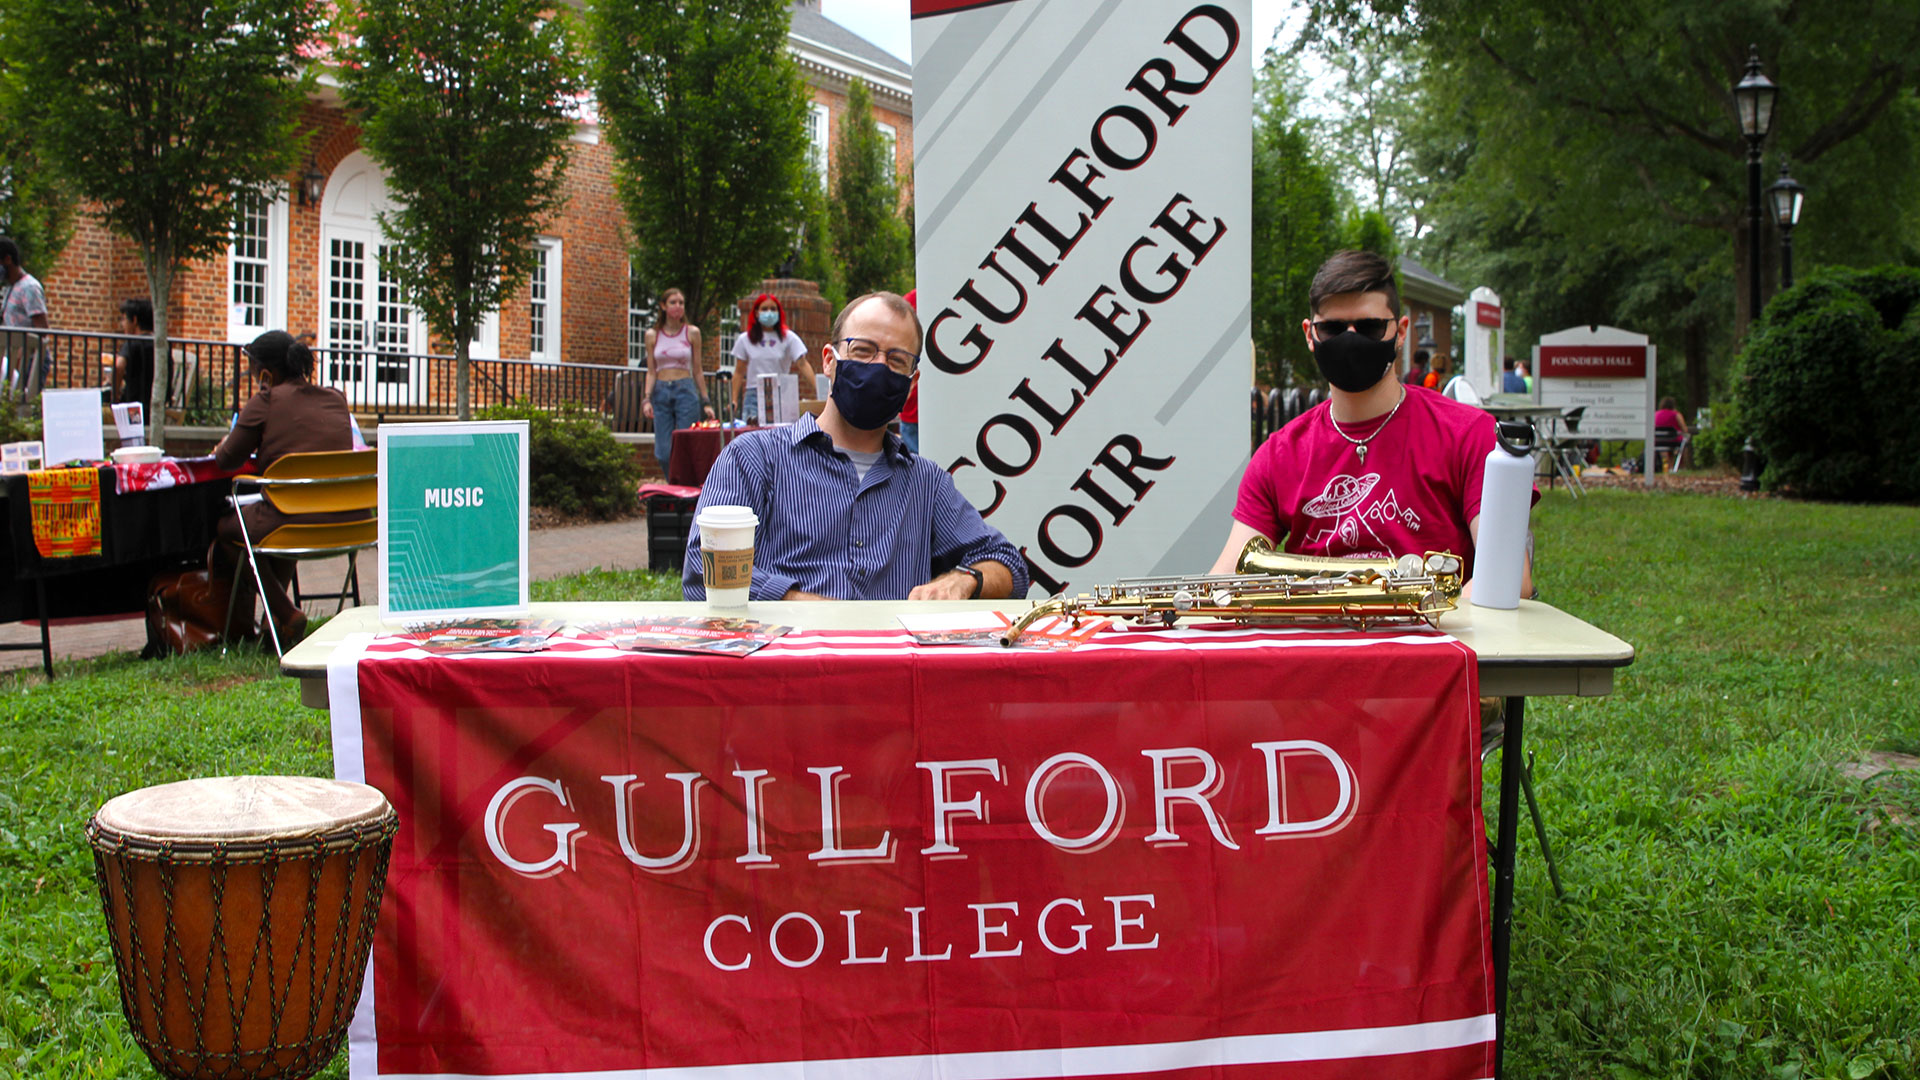 Music Professor Drew Hays and a student sit at the Guilford College Music and choir table.